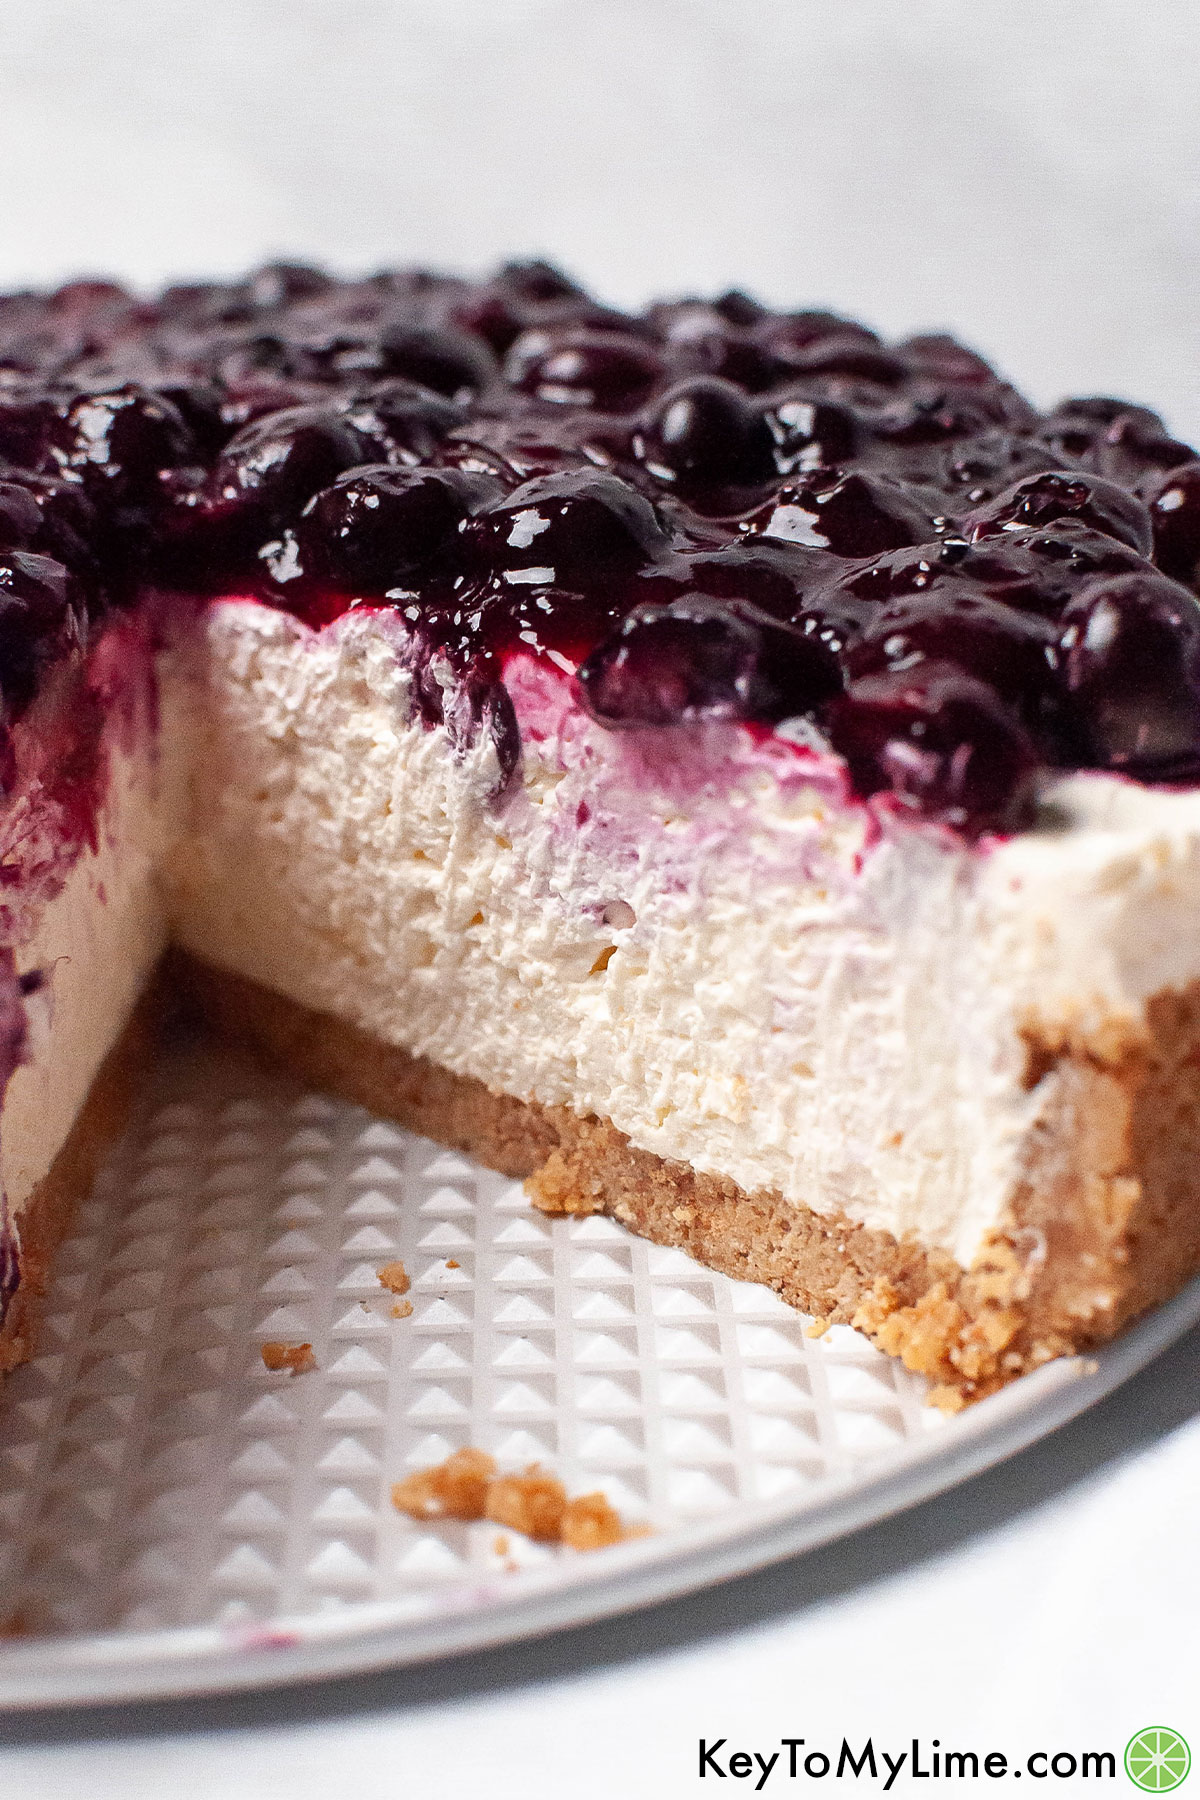 A cheesecake with a slice missing showing the individual layers of the cake.